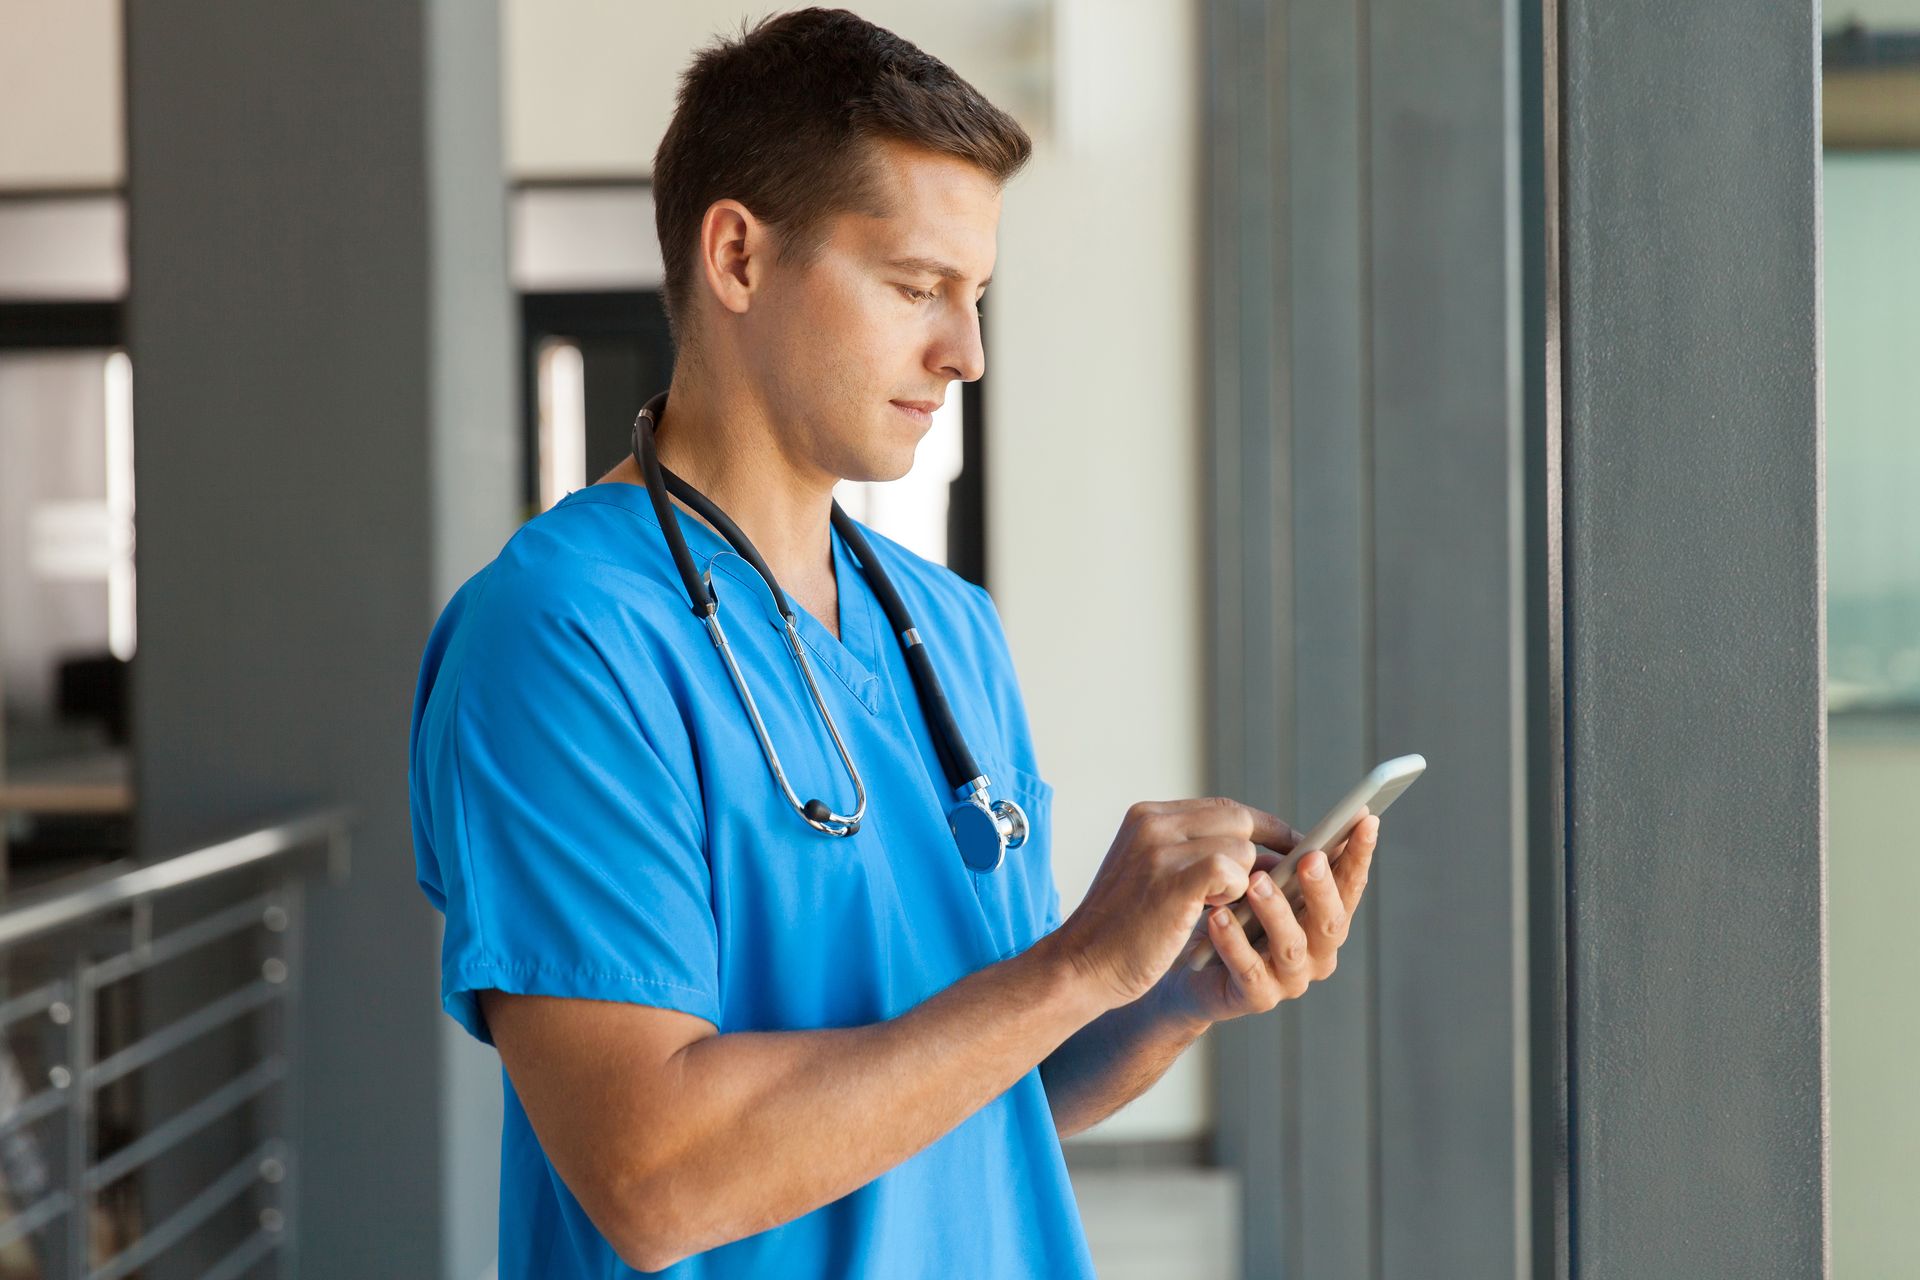 Visocall Mobile is the key to the highest quality of care